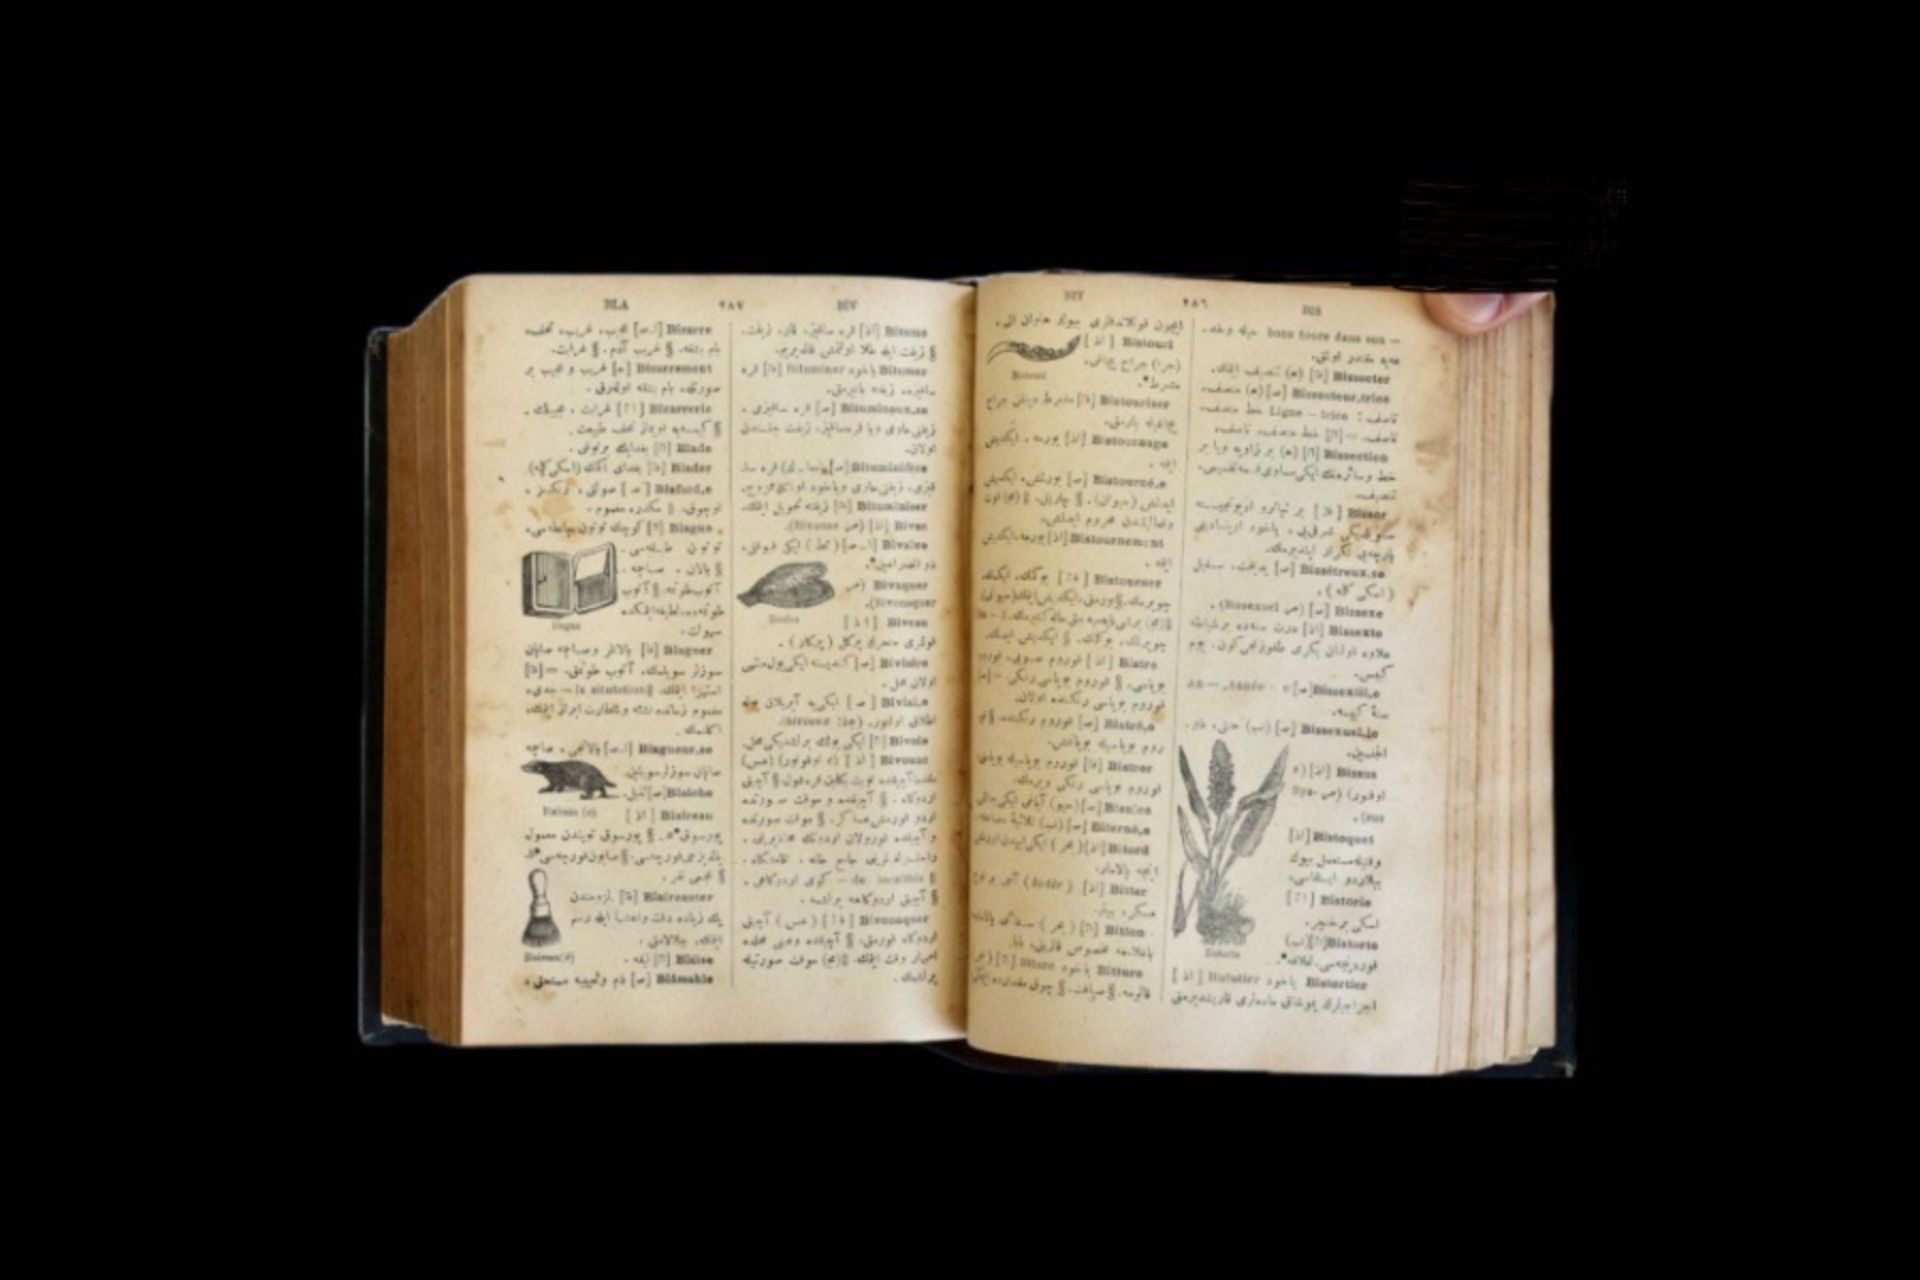 19th century French - Ottoman dictionary - Image 9 of 19